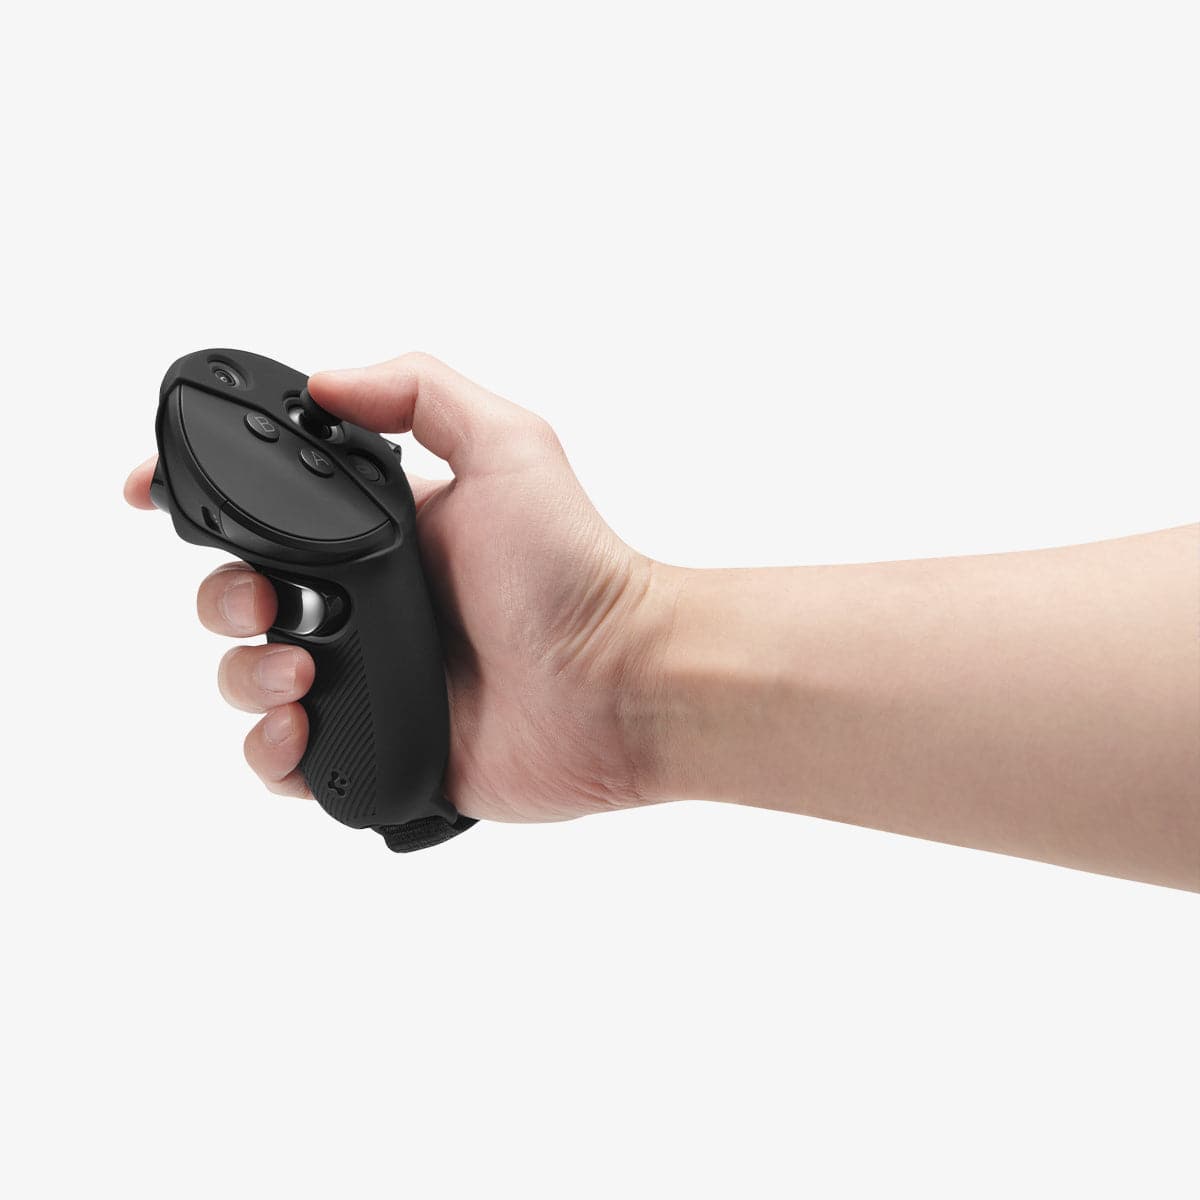 ACS06030 - Meta Quest Pro Controller Silicone Fit in black showing the controller in someone's hand